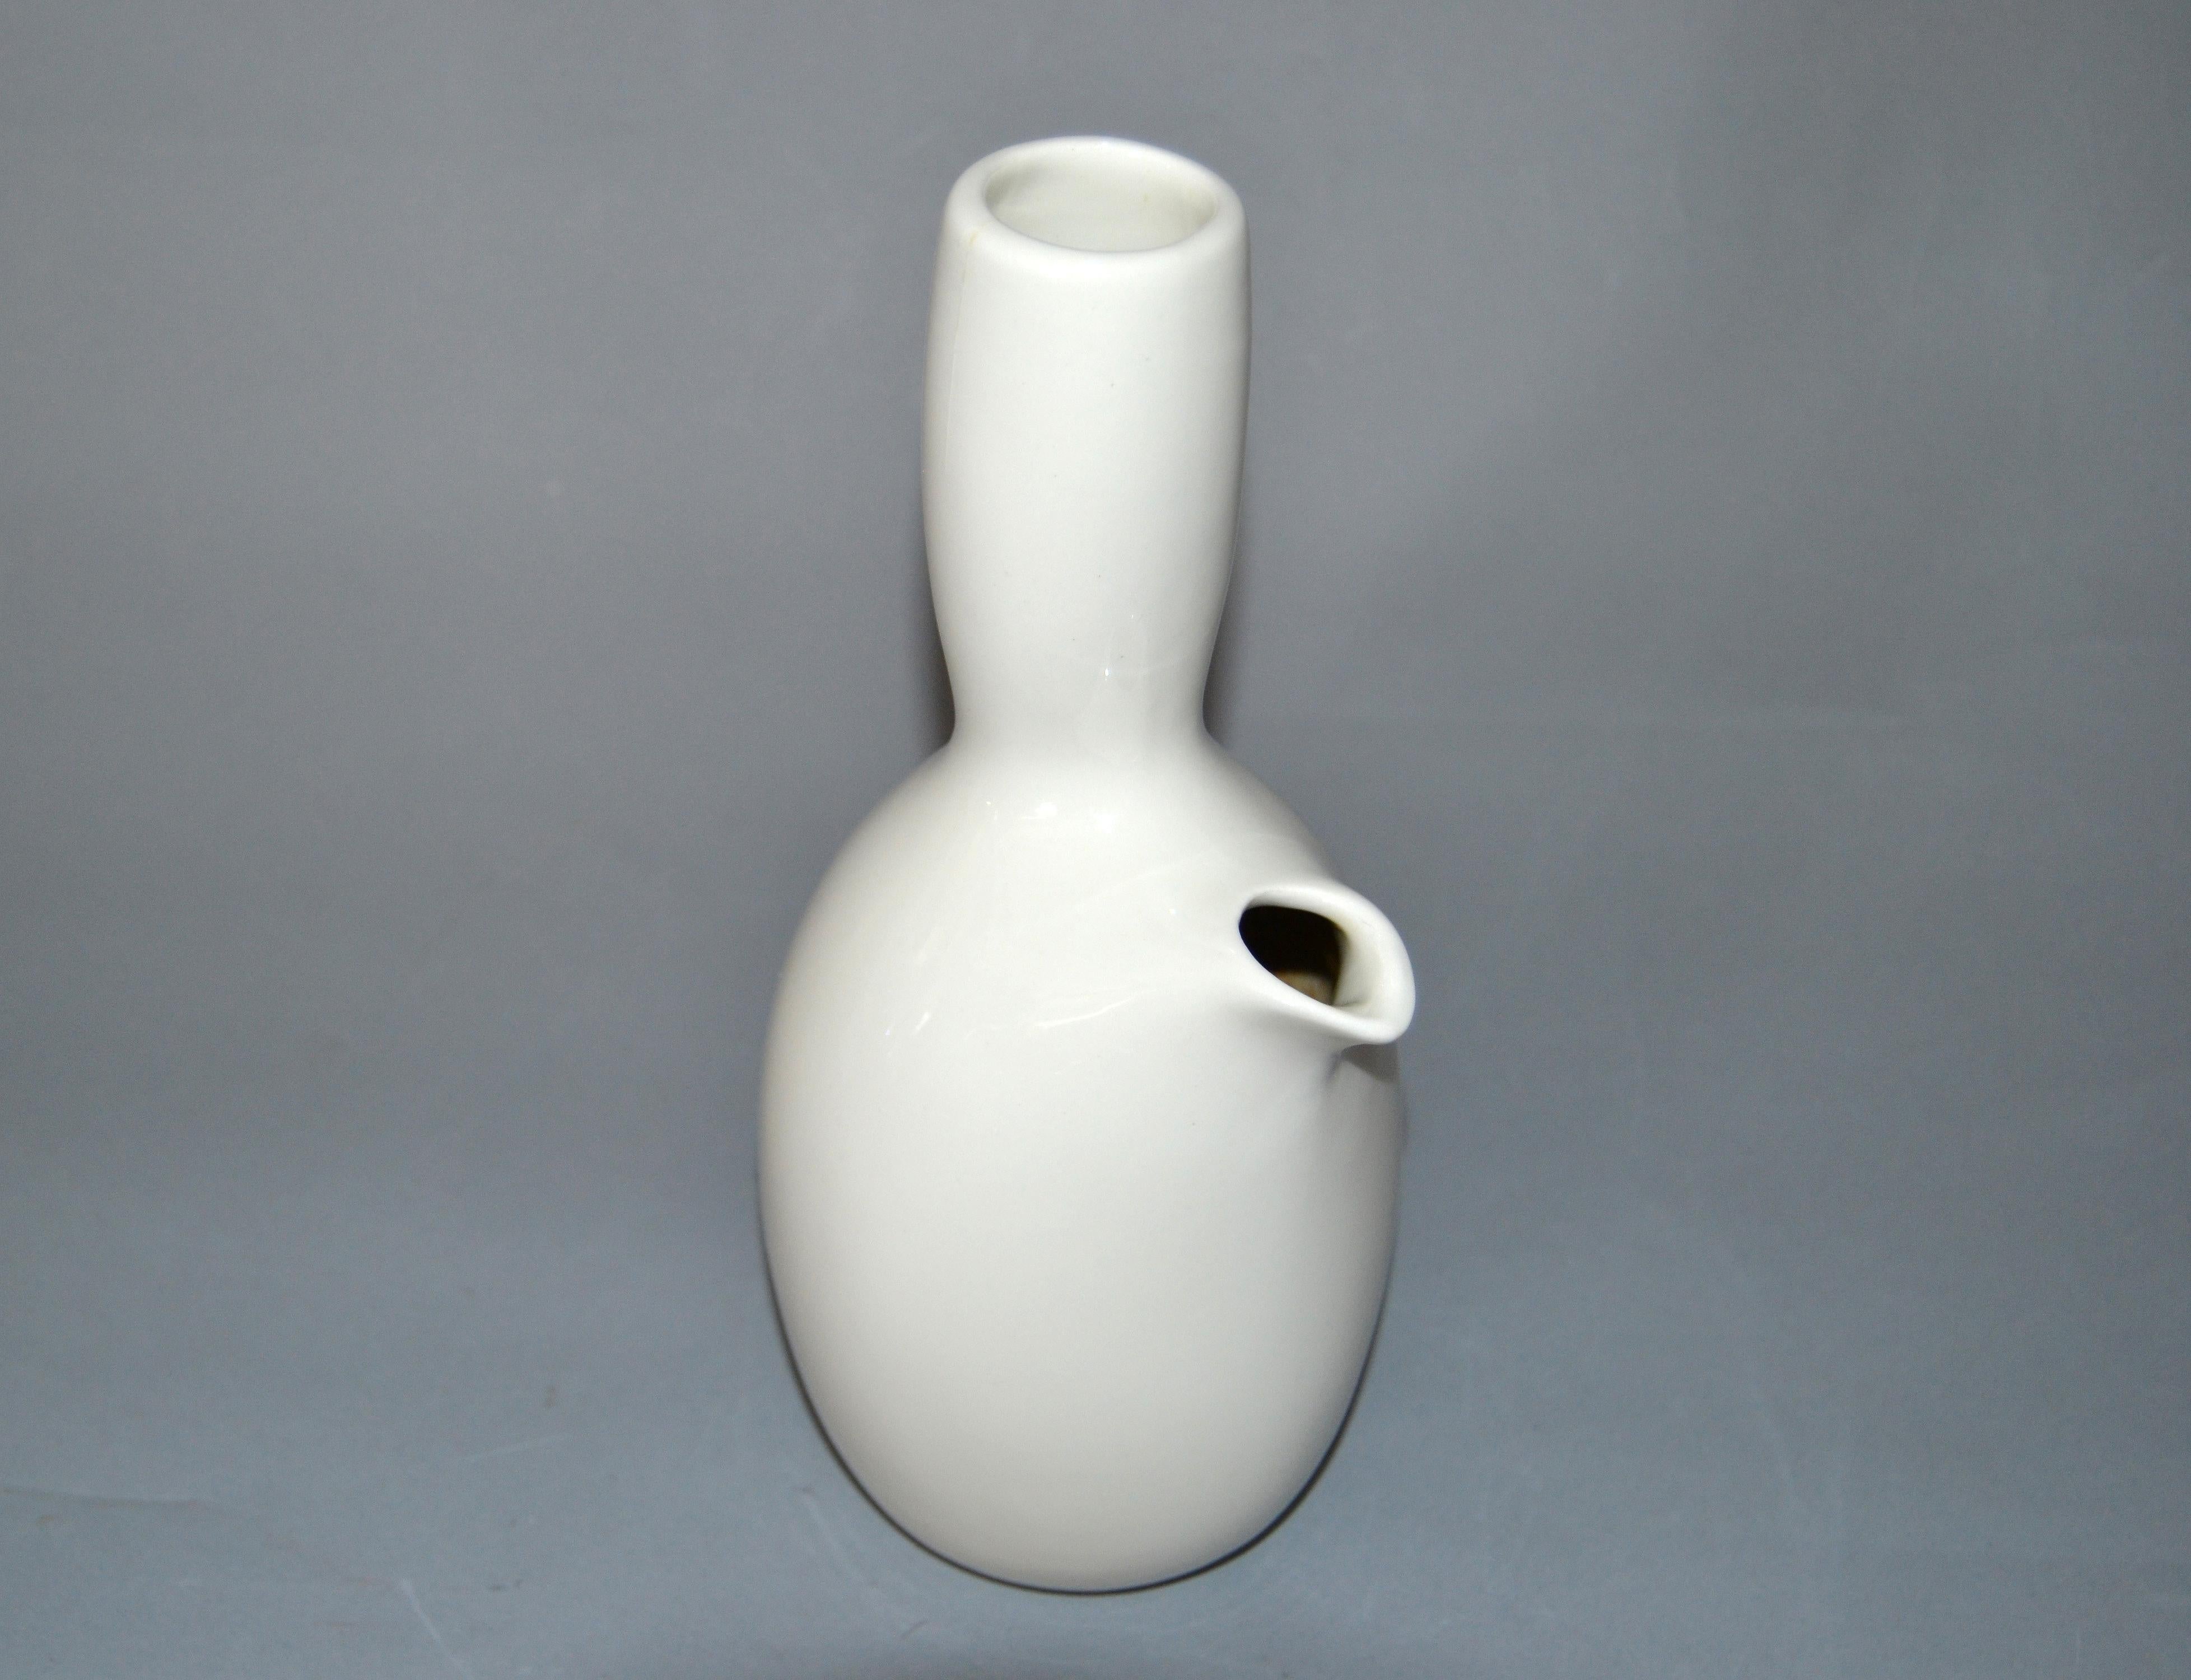 American modern Iroquois white porcelain carafe Russel Wright for Bauer Pottery.
'Good design is for everyone' is how designer Russel Wright described his guiding philosophy. Originally released in 1939, his American Modern dinnerware reflects this